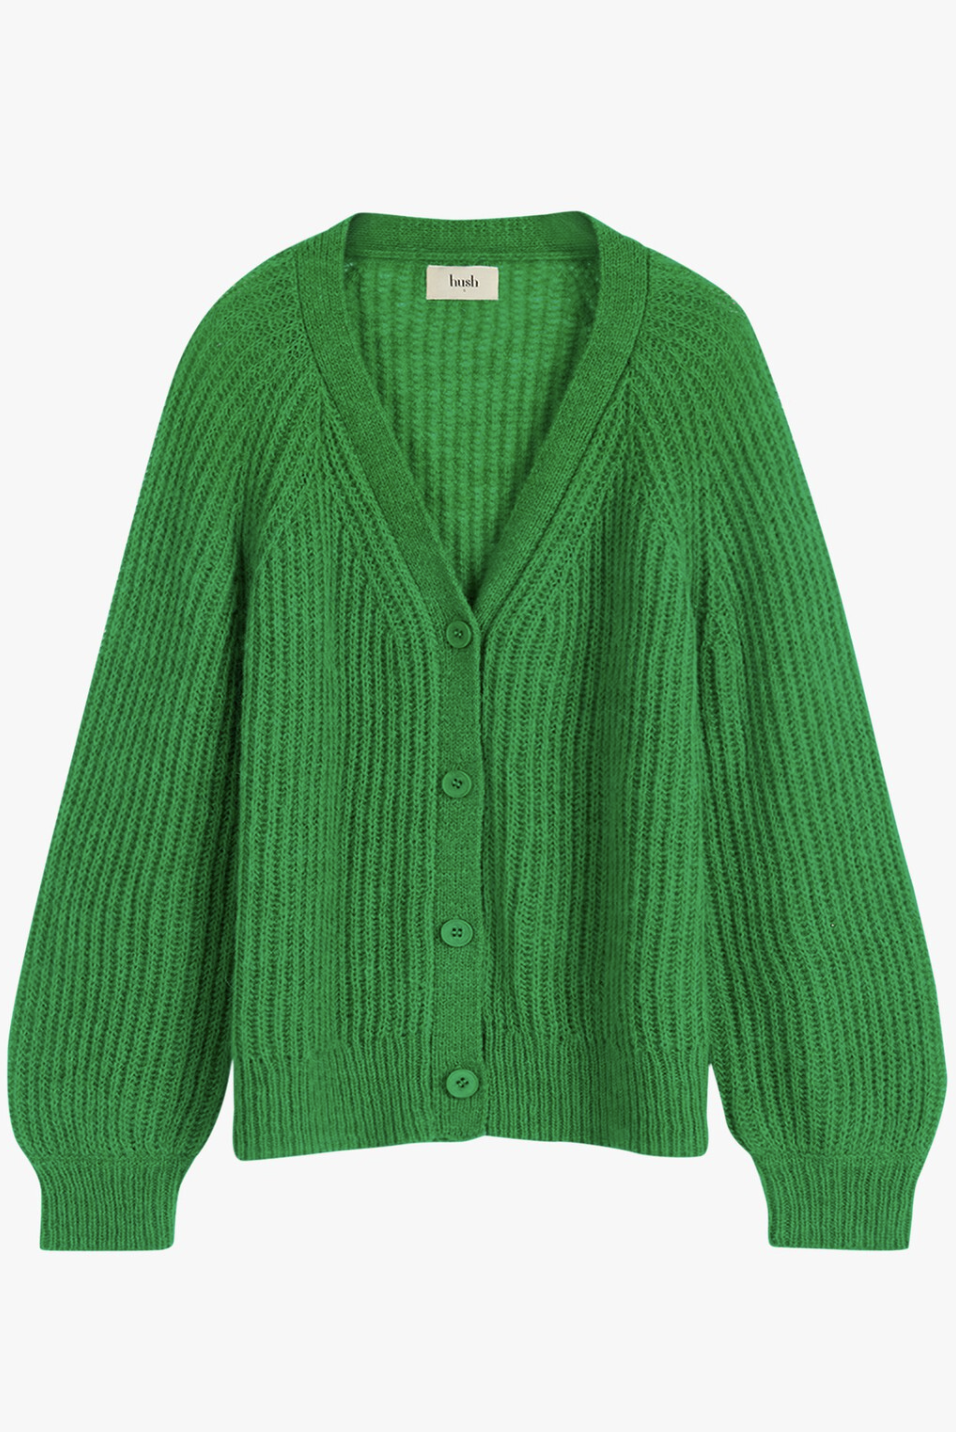 Best cardigans UK: 15 cardigans for women to shop in 2023